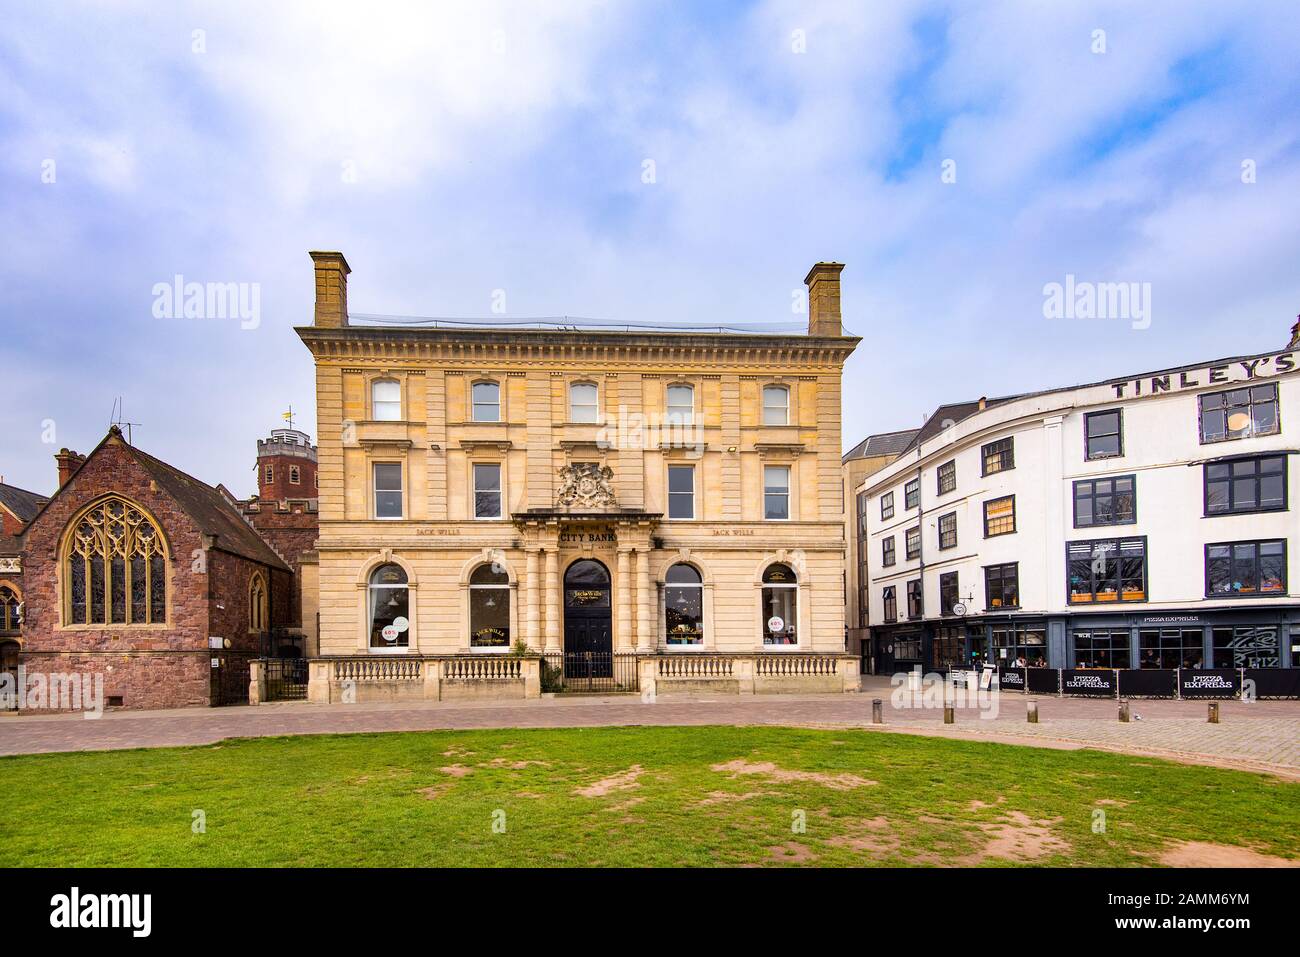 EXETER, DEVON, UK - 31MAR19: The City Bank in Cathedral Close was the third bank to open in Exeter. The building dates from 1786. Stock Photo